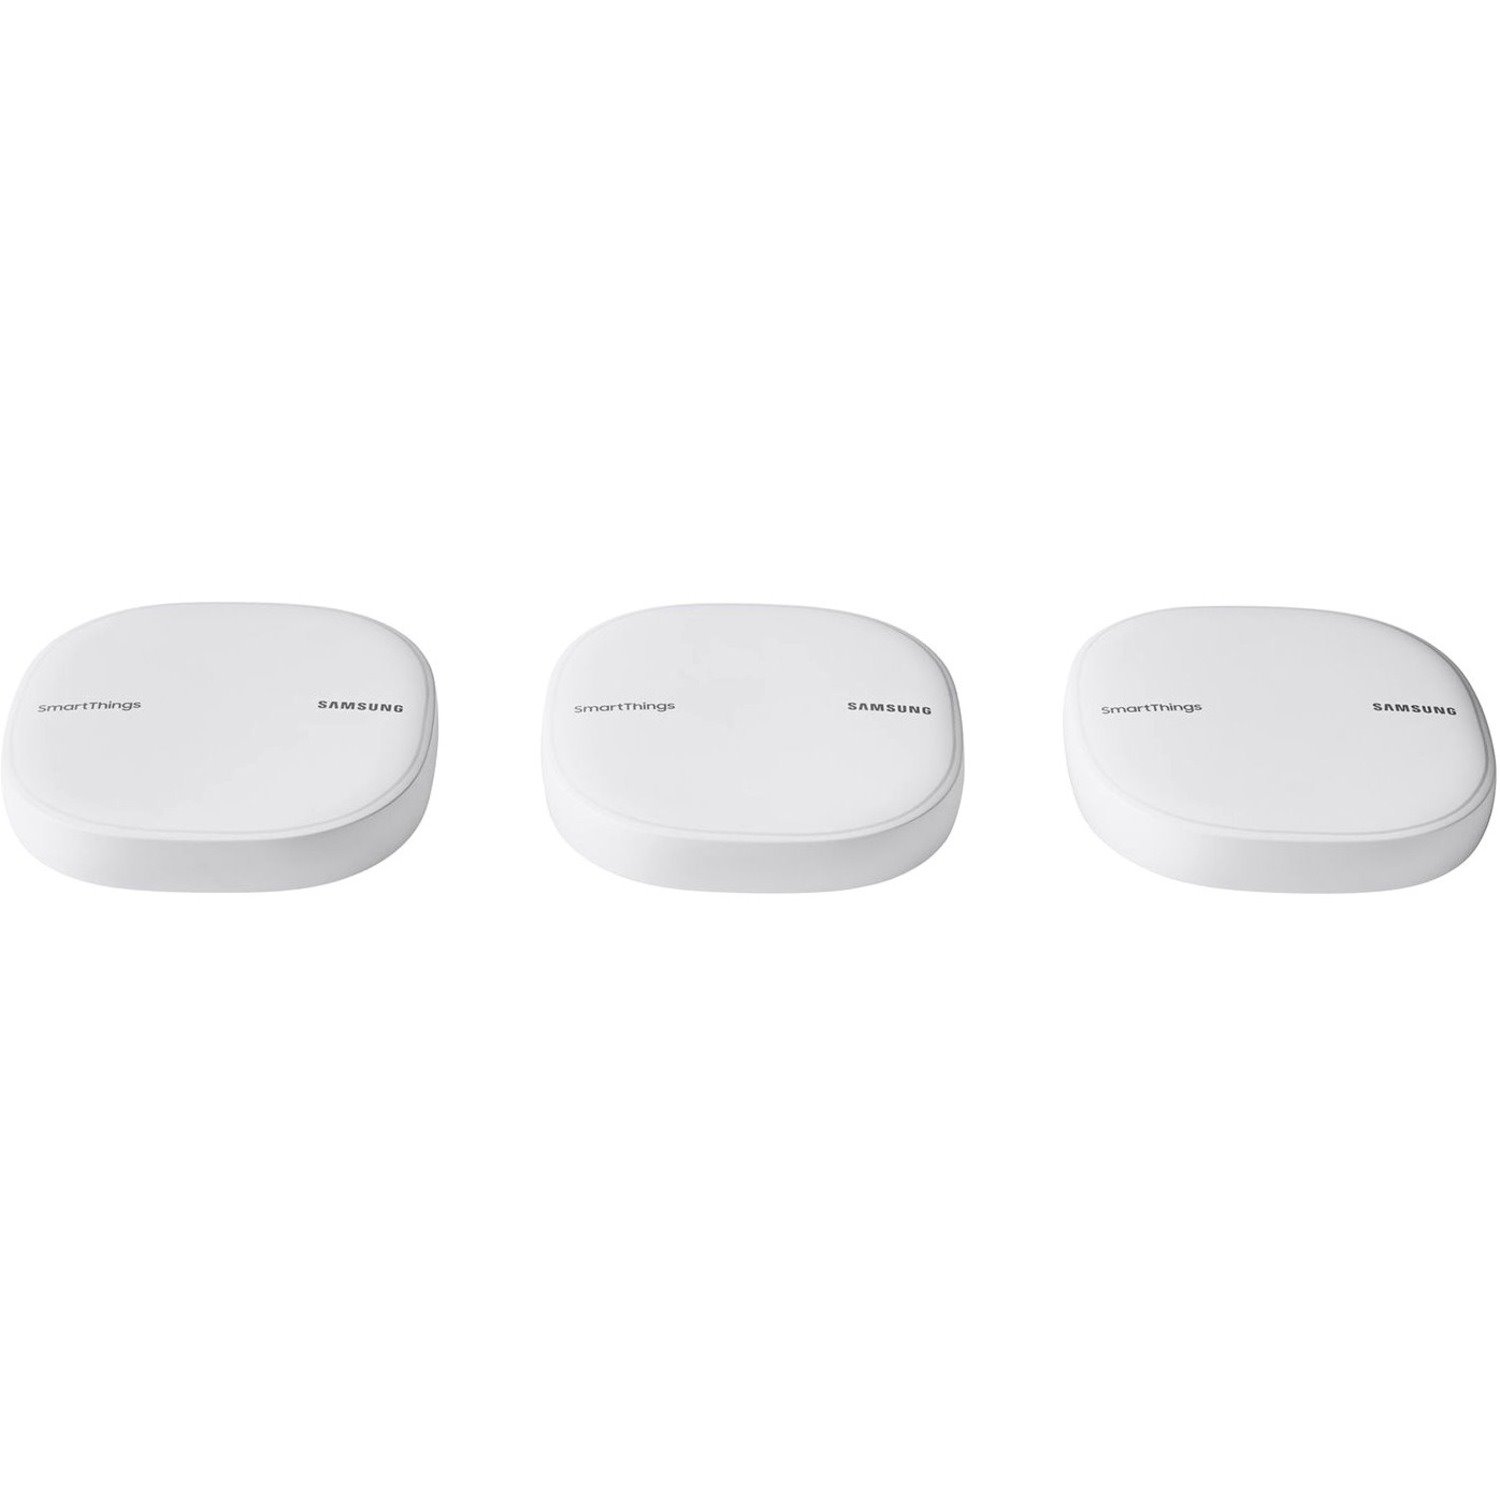 Samsung SmartThings Wi-Fi 5 IEEE 802.11ac Ethernet Wireless Router